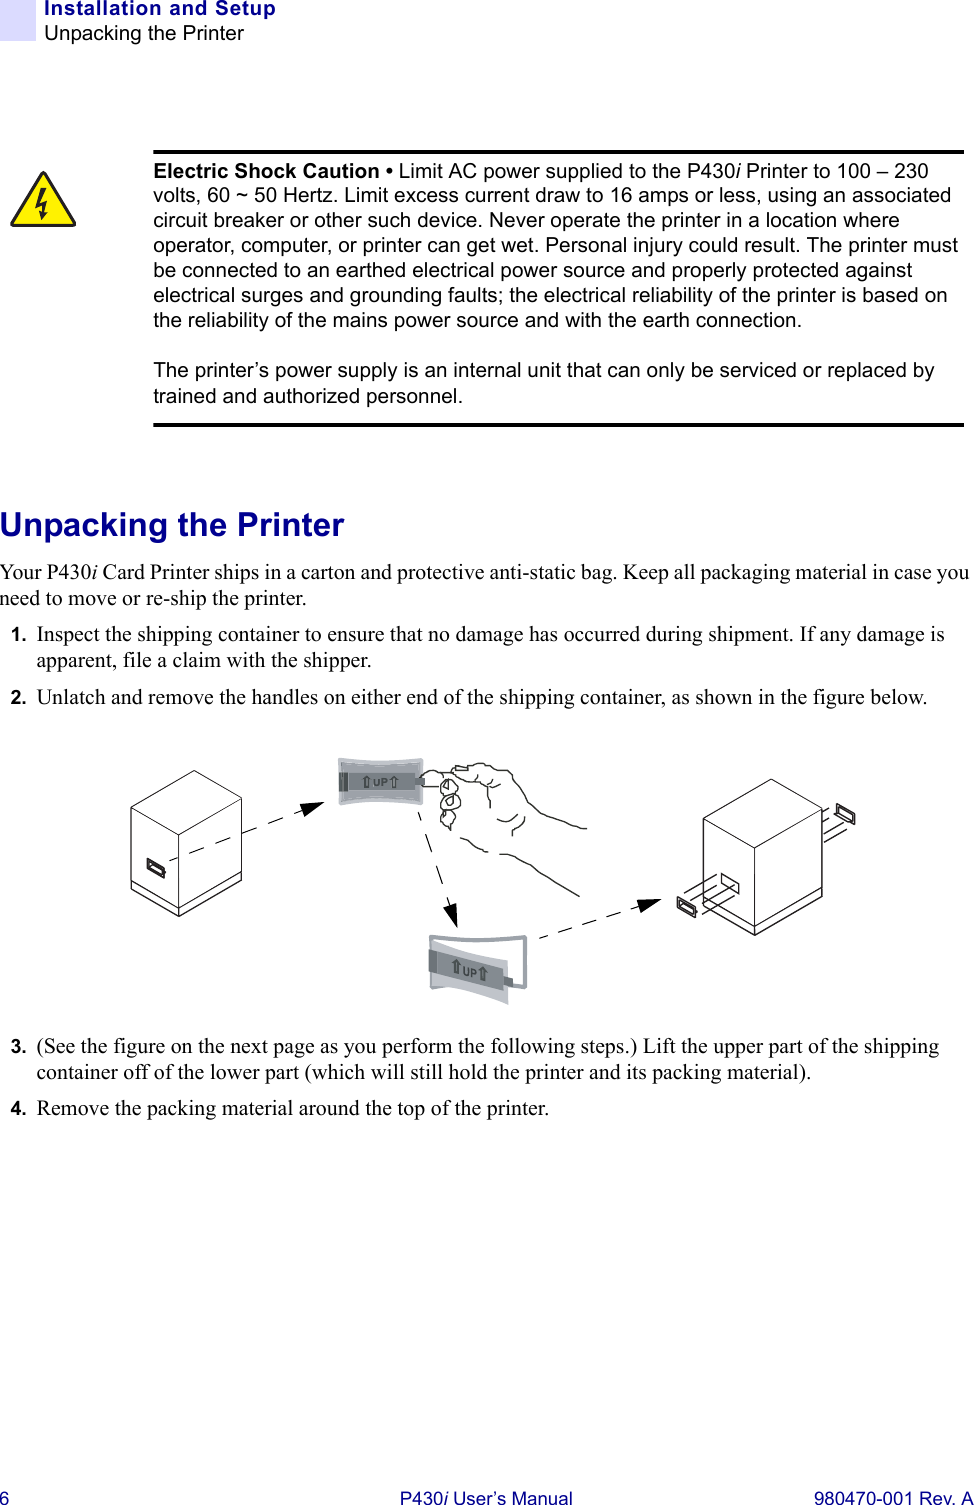 6 P430i User’s Manual 980470-001 Rev. AInstallation and SetupUnpacking the PrinterUnpacking the PrinterYour P4 30i Card Printer ships in a carton and protective anti-static bag. Keep all packaging material in case you need to move or re-ship the printer.1. Inspect the shipping container to ensure that no damage has occurred during shipment. If any damage is apparent, file a claim with the shipper.2. Unlatch and remove the handles on either end of the shipping container, as shown in the figure below.3. (See the figure on the next page as you perform the following steps.) Lift the upper part of the shipping container off of the lower part (which will still hold the printer and its packing material).4. Remove the packing material around the top of the printer.Electric Shock Caution • Limit AC power supplied to the P430i Printer to 100 – 230 volts, 60 ~ 50 Hertz. Limit excess current draw to 16 amps or less, using an associated circuit breaker or other such device. Never operate the printer in a location where operator, computer, or printer can get wet. Personal injury could result. The printer must be connected to an earthed electrical power source and properly protected against electrical surges and grounding faults; the electrical reliability of the printer is based on the reliability of the mains power source and with the earth connection.The printer’s power supply is an internal unit that can only be serviced or replaced by trained and authorized personnel.UP